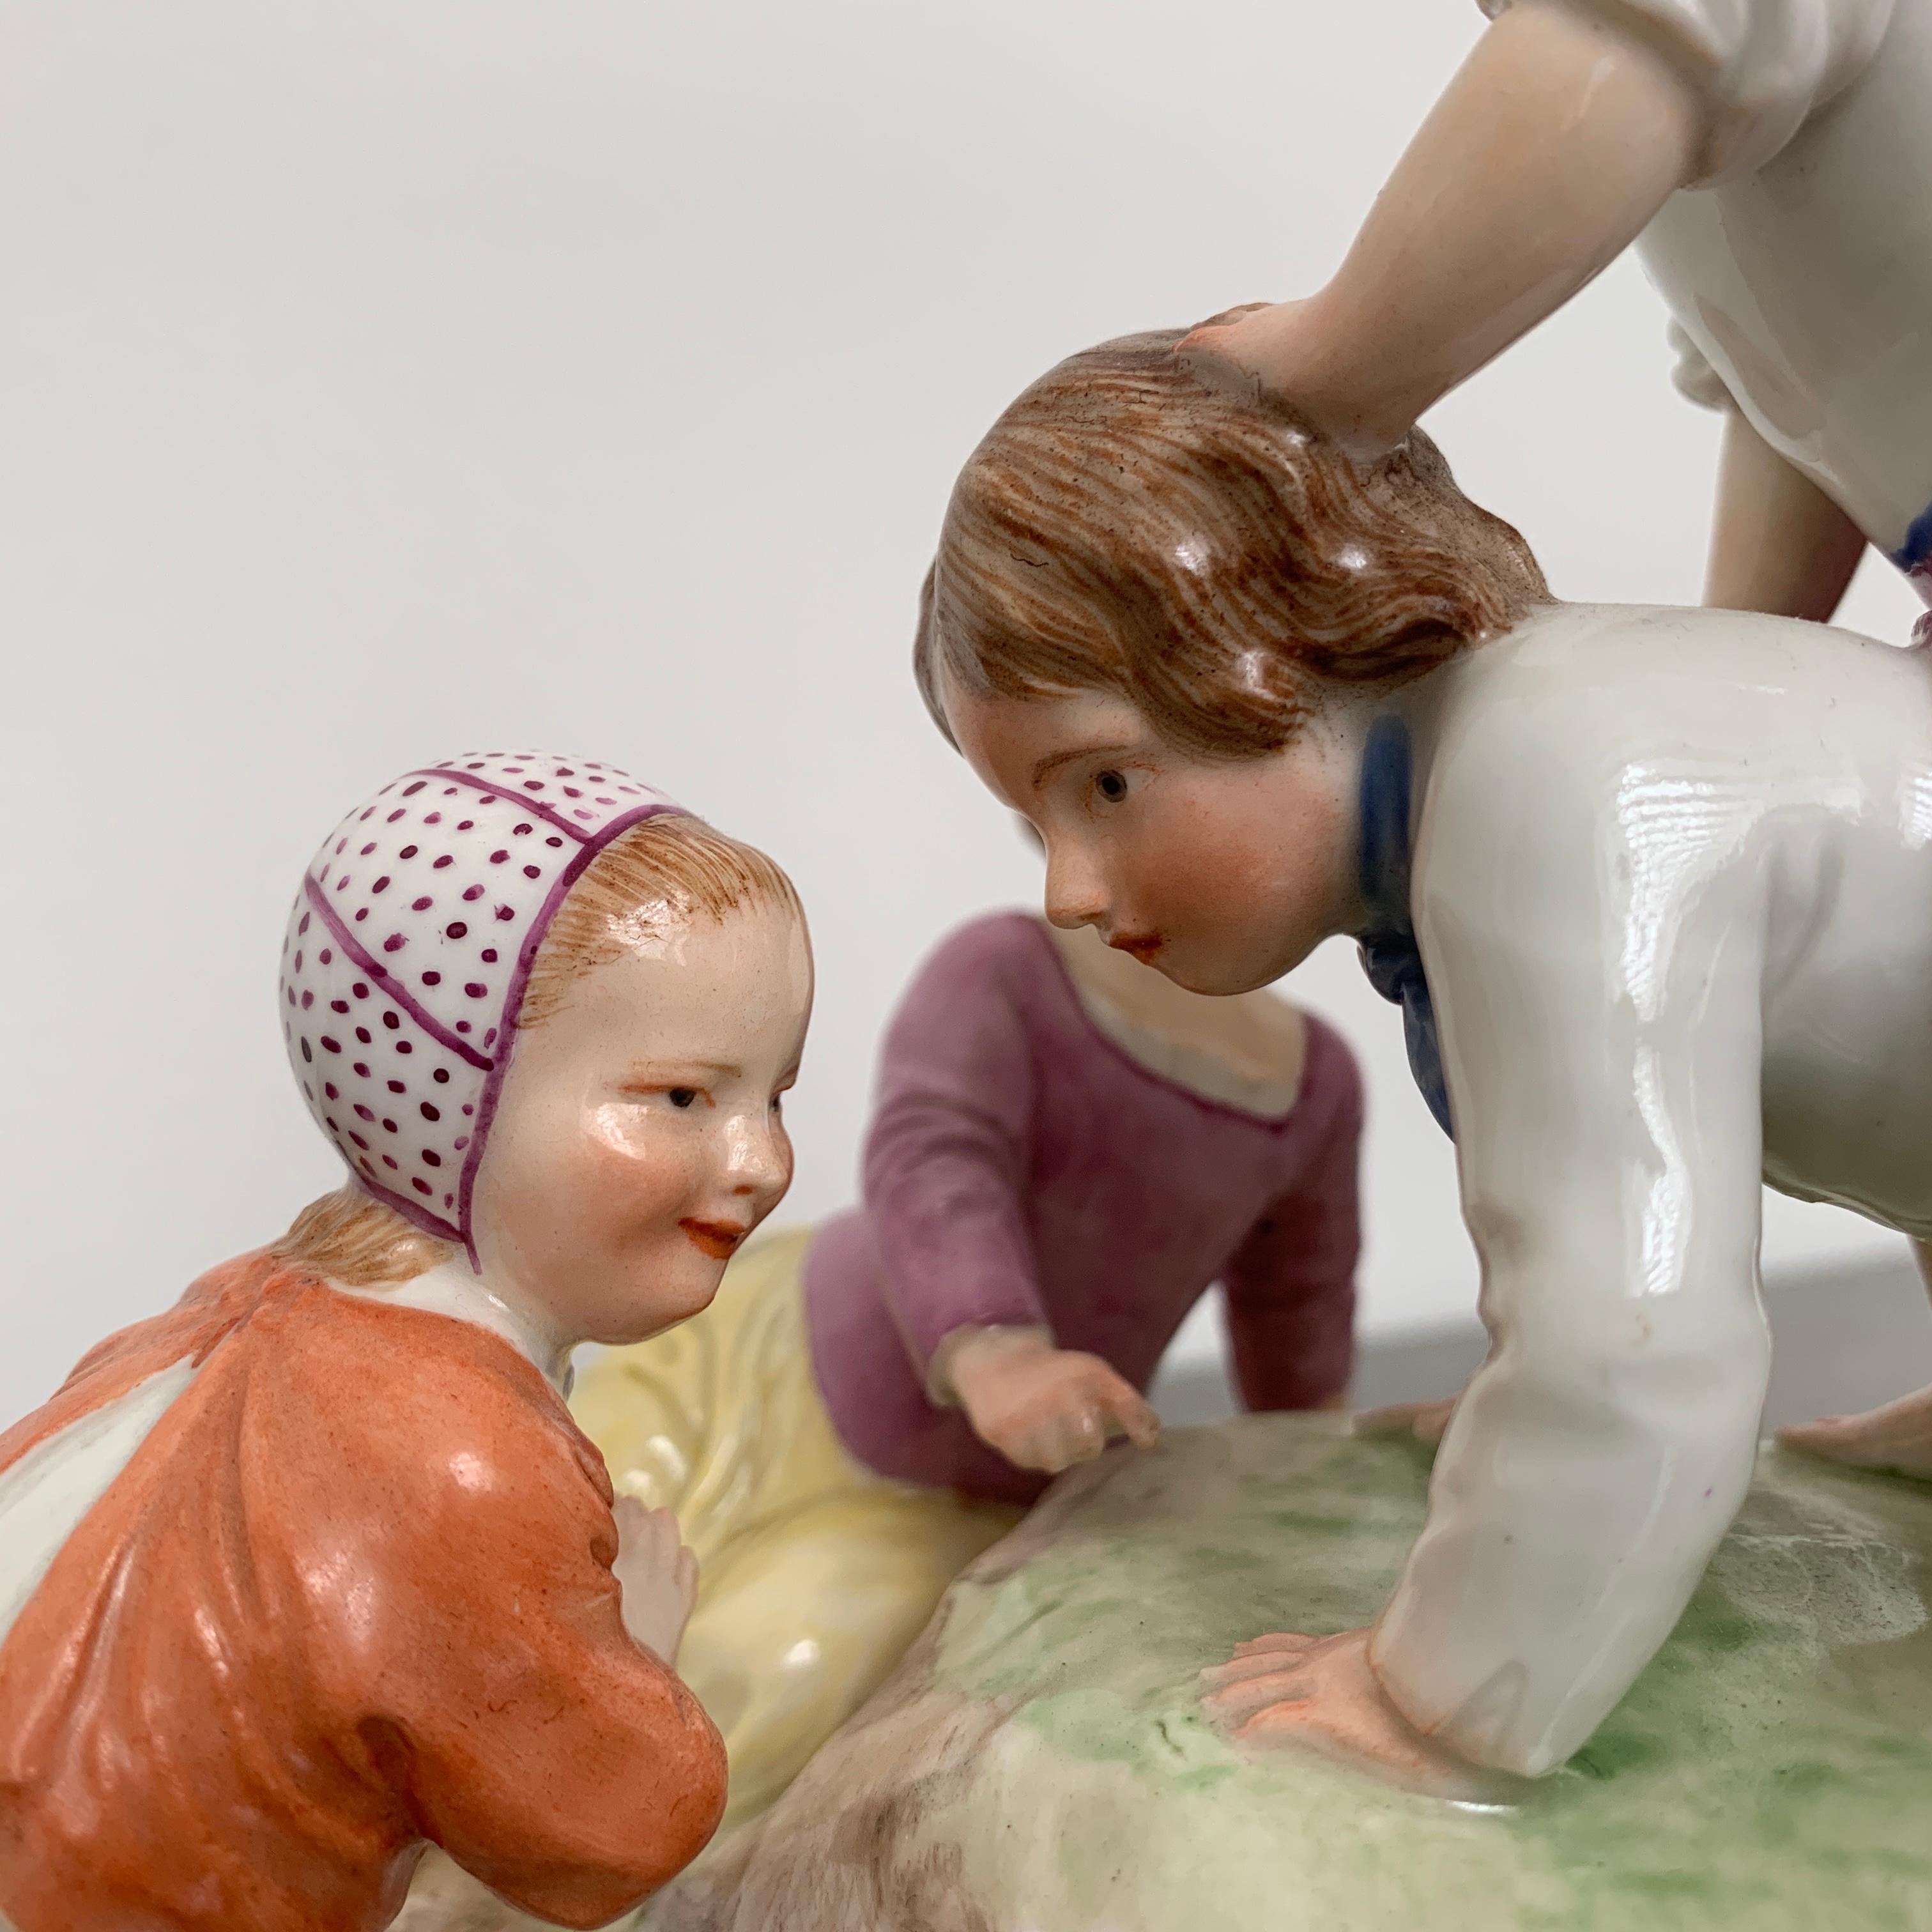 Rococo 18th Century Frankenthal Group of Playing Children by Johann Peter Melchior For Sale